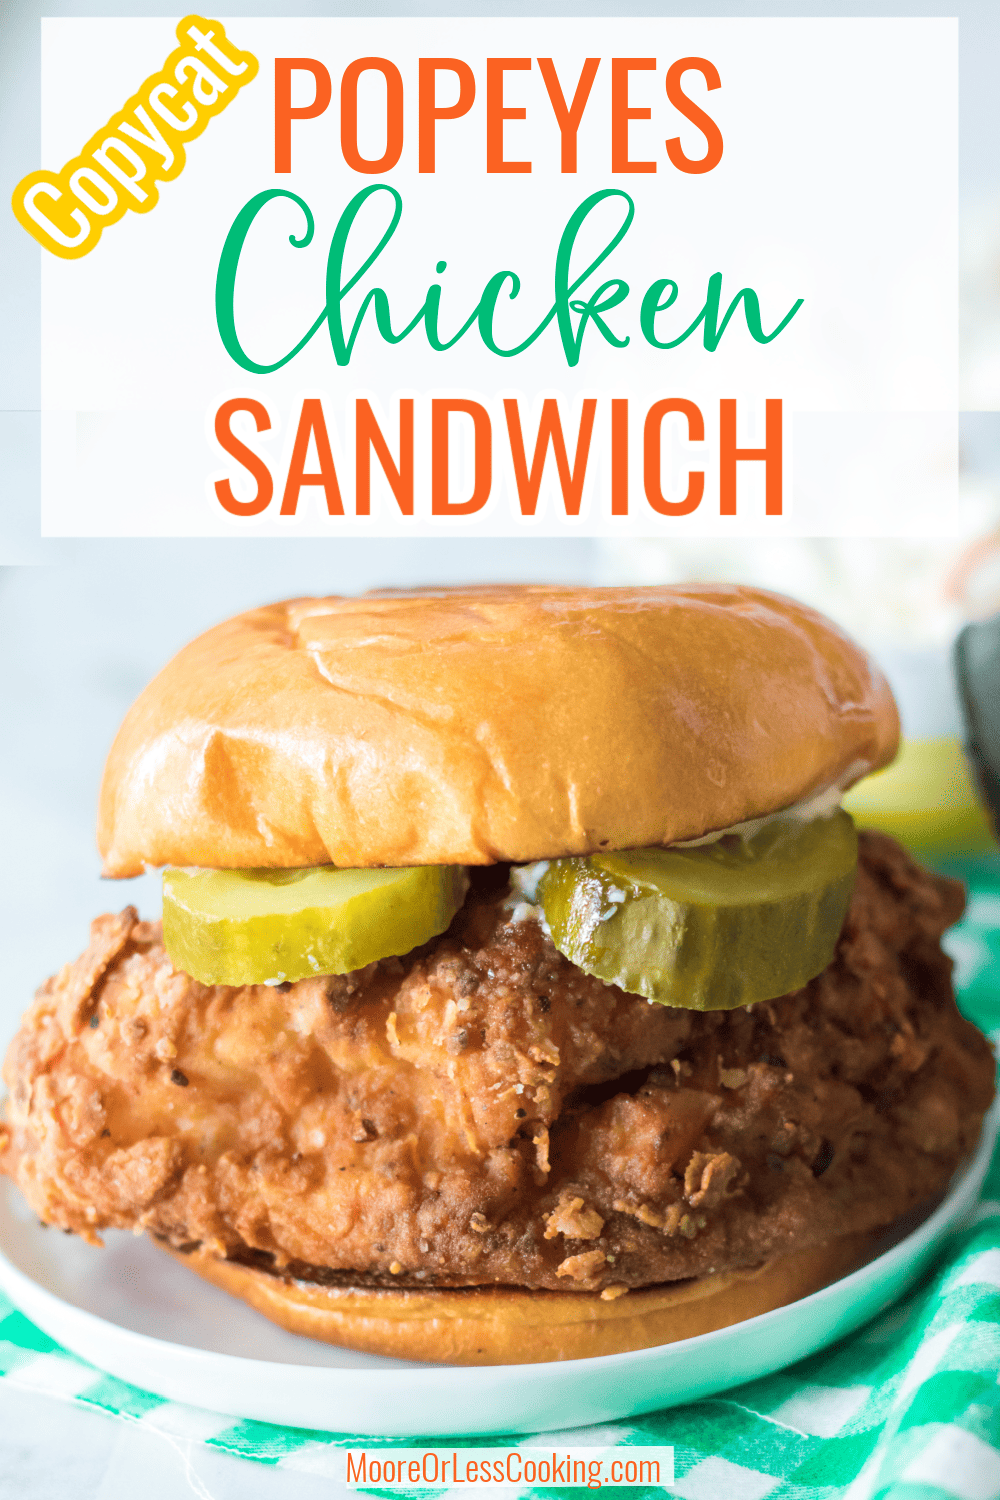 Ultra crispy, perfectly seasoned with a spicy kick, and nestled in a toasted brioche bun complete with a crispy dill pickle for a satisfying bite, this Copycat Popeyes Chicken Sandwich is the ultimate make-at-home version that may be better than the original. via @Mooreorlesscook